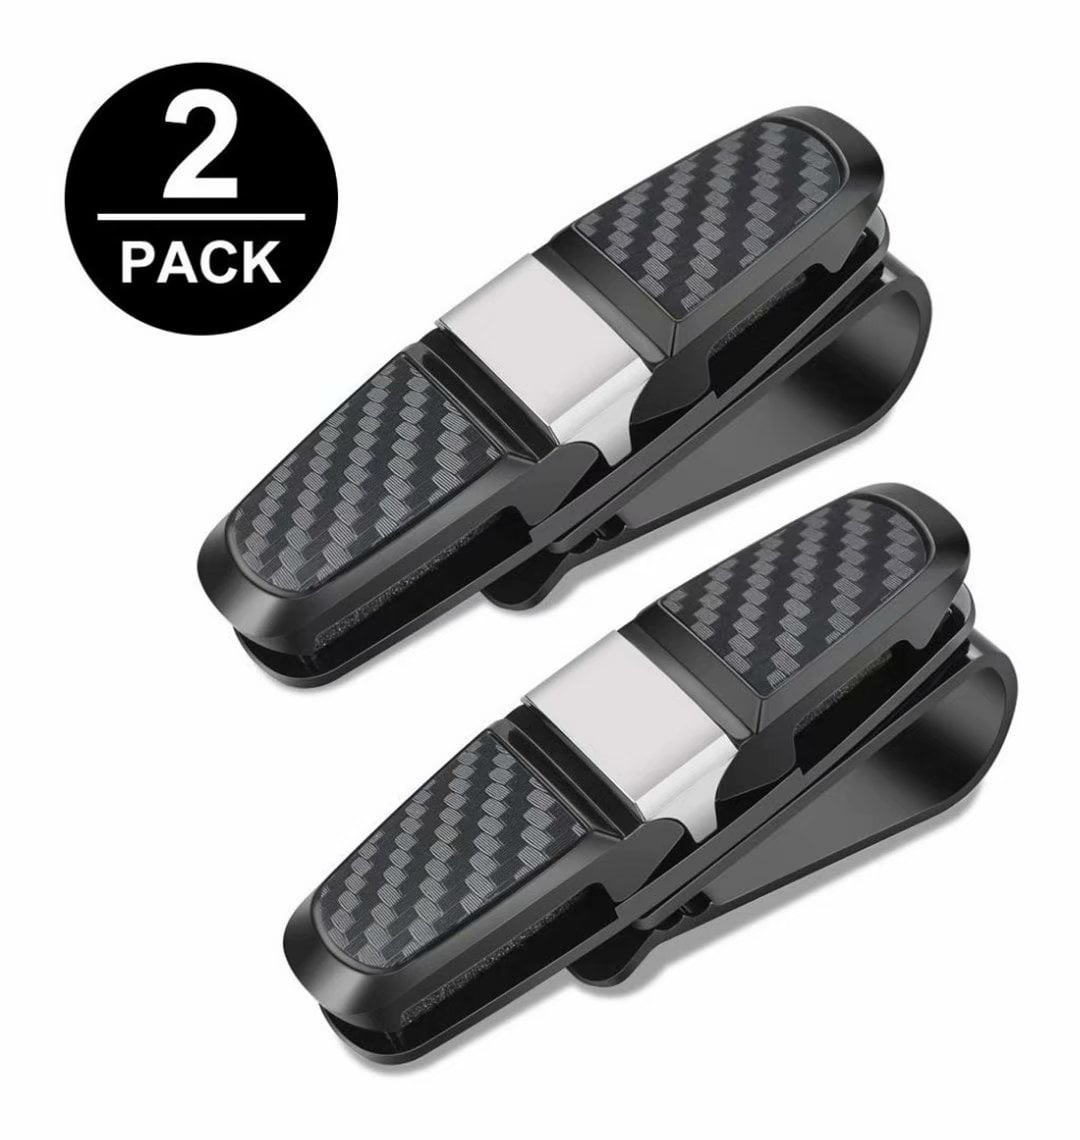 2 Pack Sunglasses Holder Clip Hanger Eyeglasses Mount for Car Double-Ends Clip and 180° Rotational Car Glasses Holder with Ticket Card Clip 2Black Generies Brands Glasses Holder for Car Sun Visor 